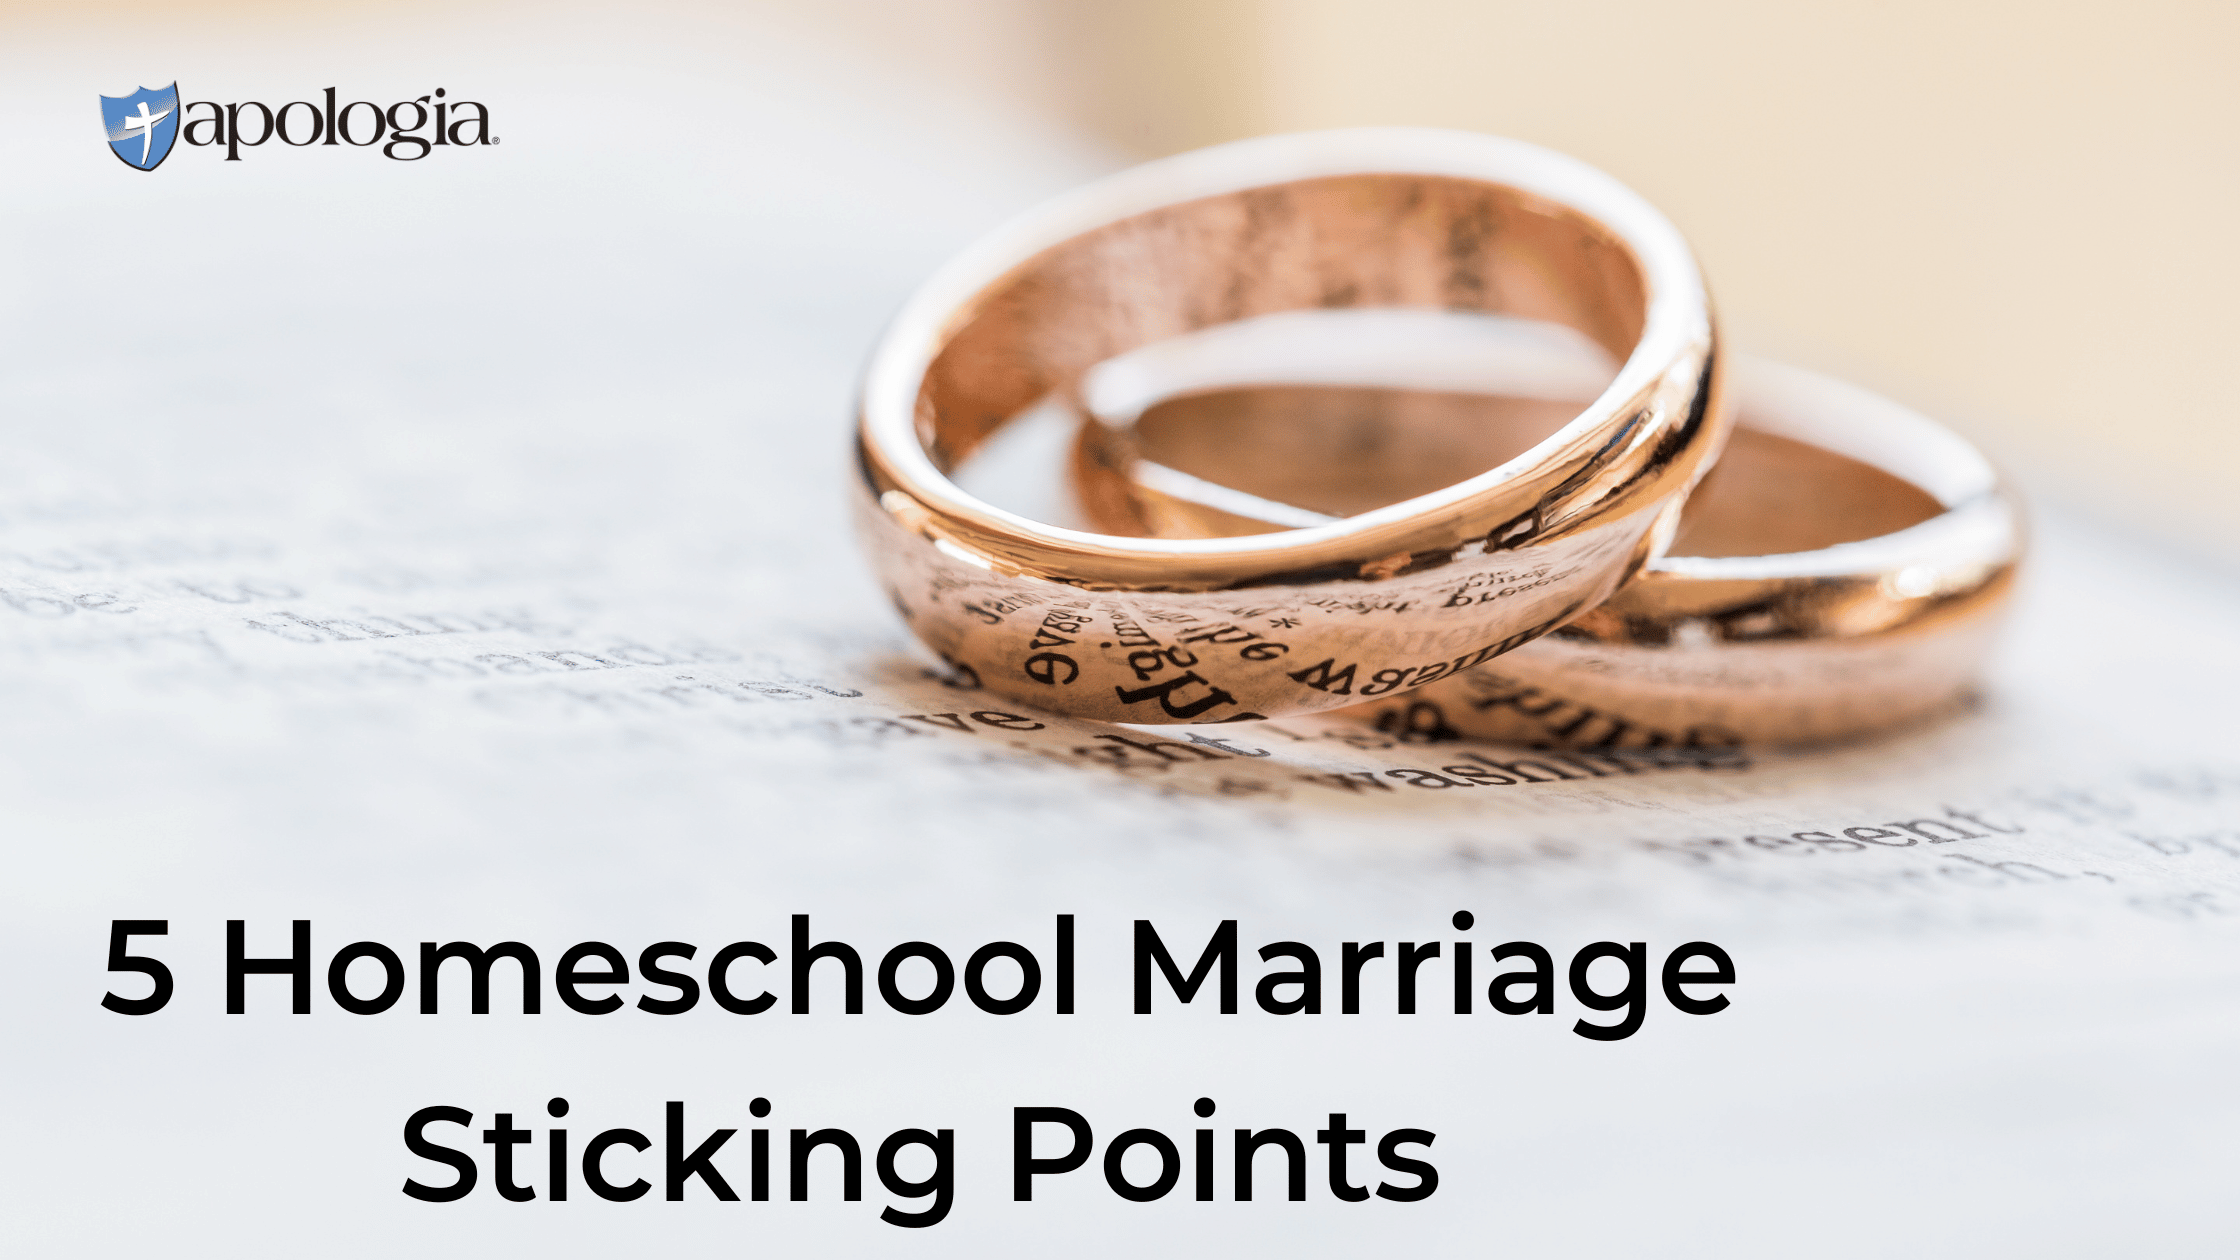 5 Homeschool Marriage Sticking Points